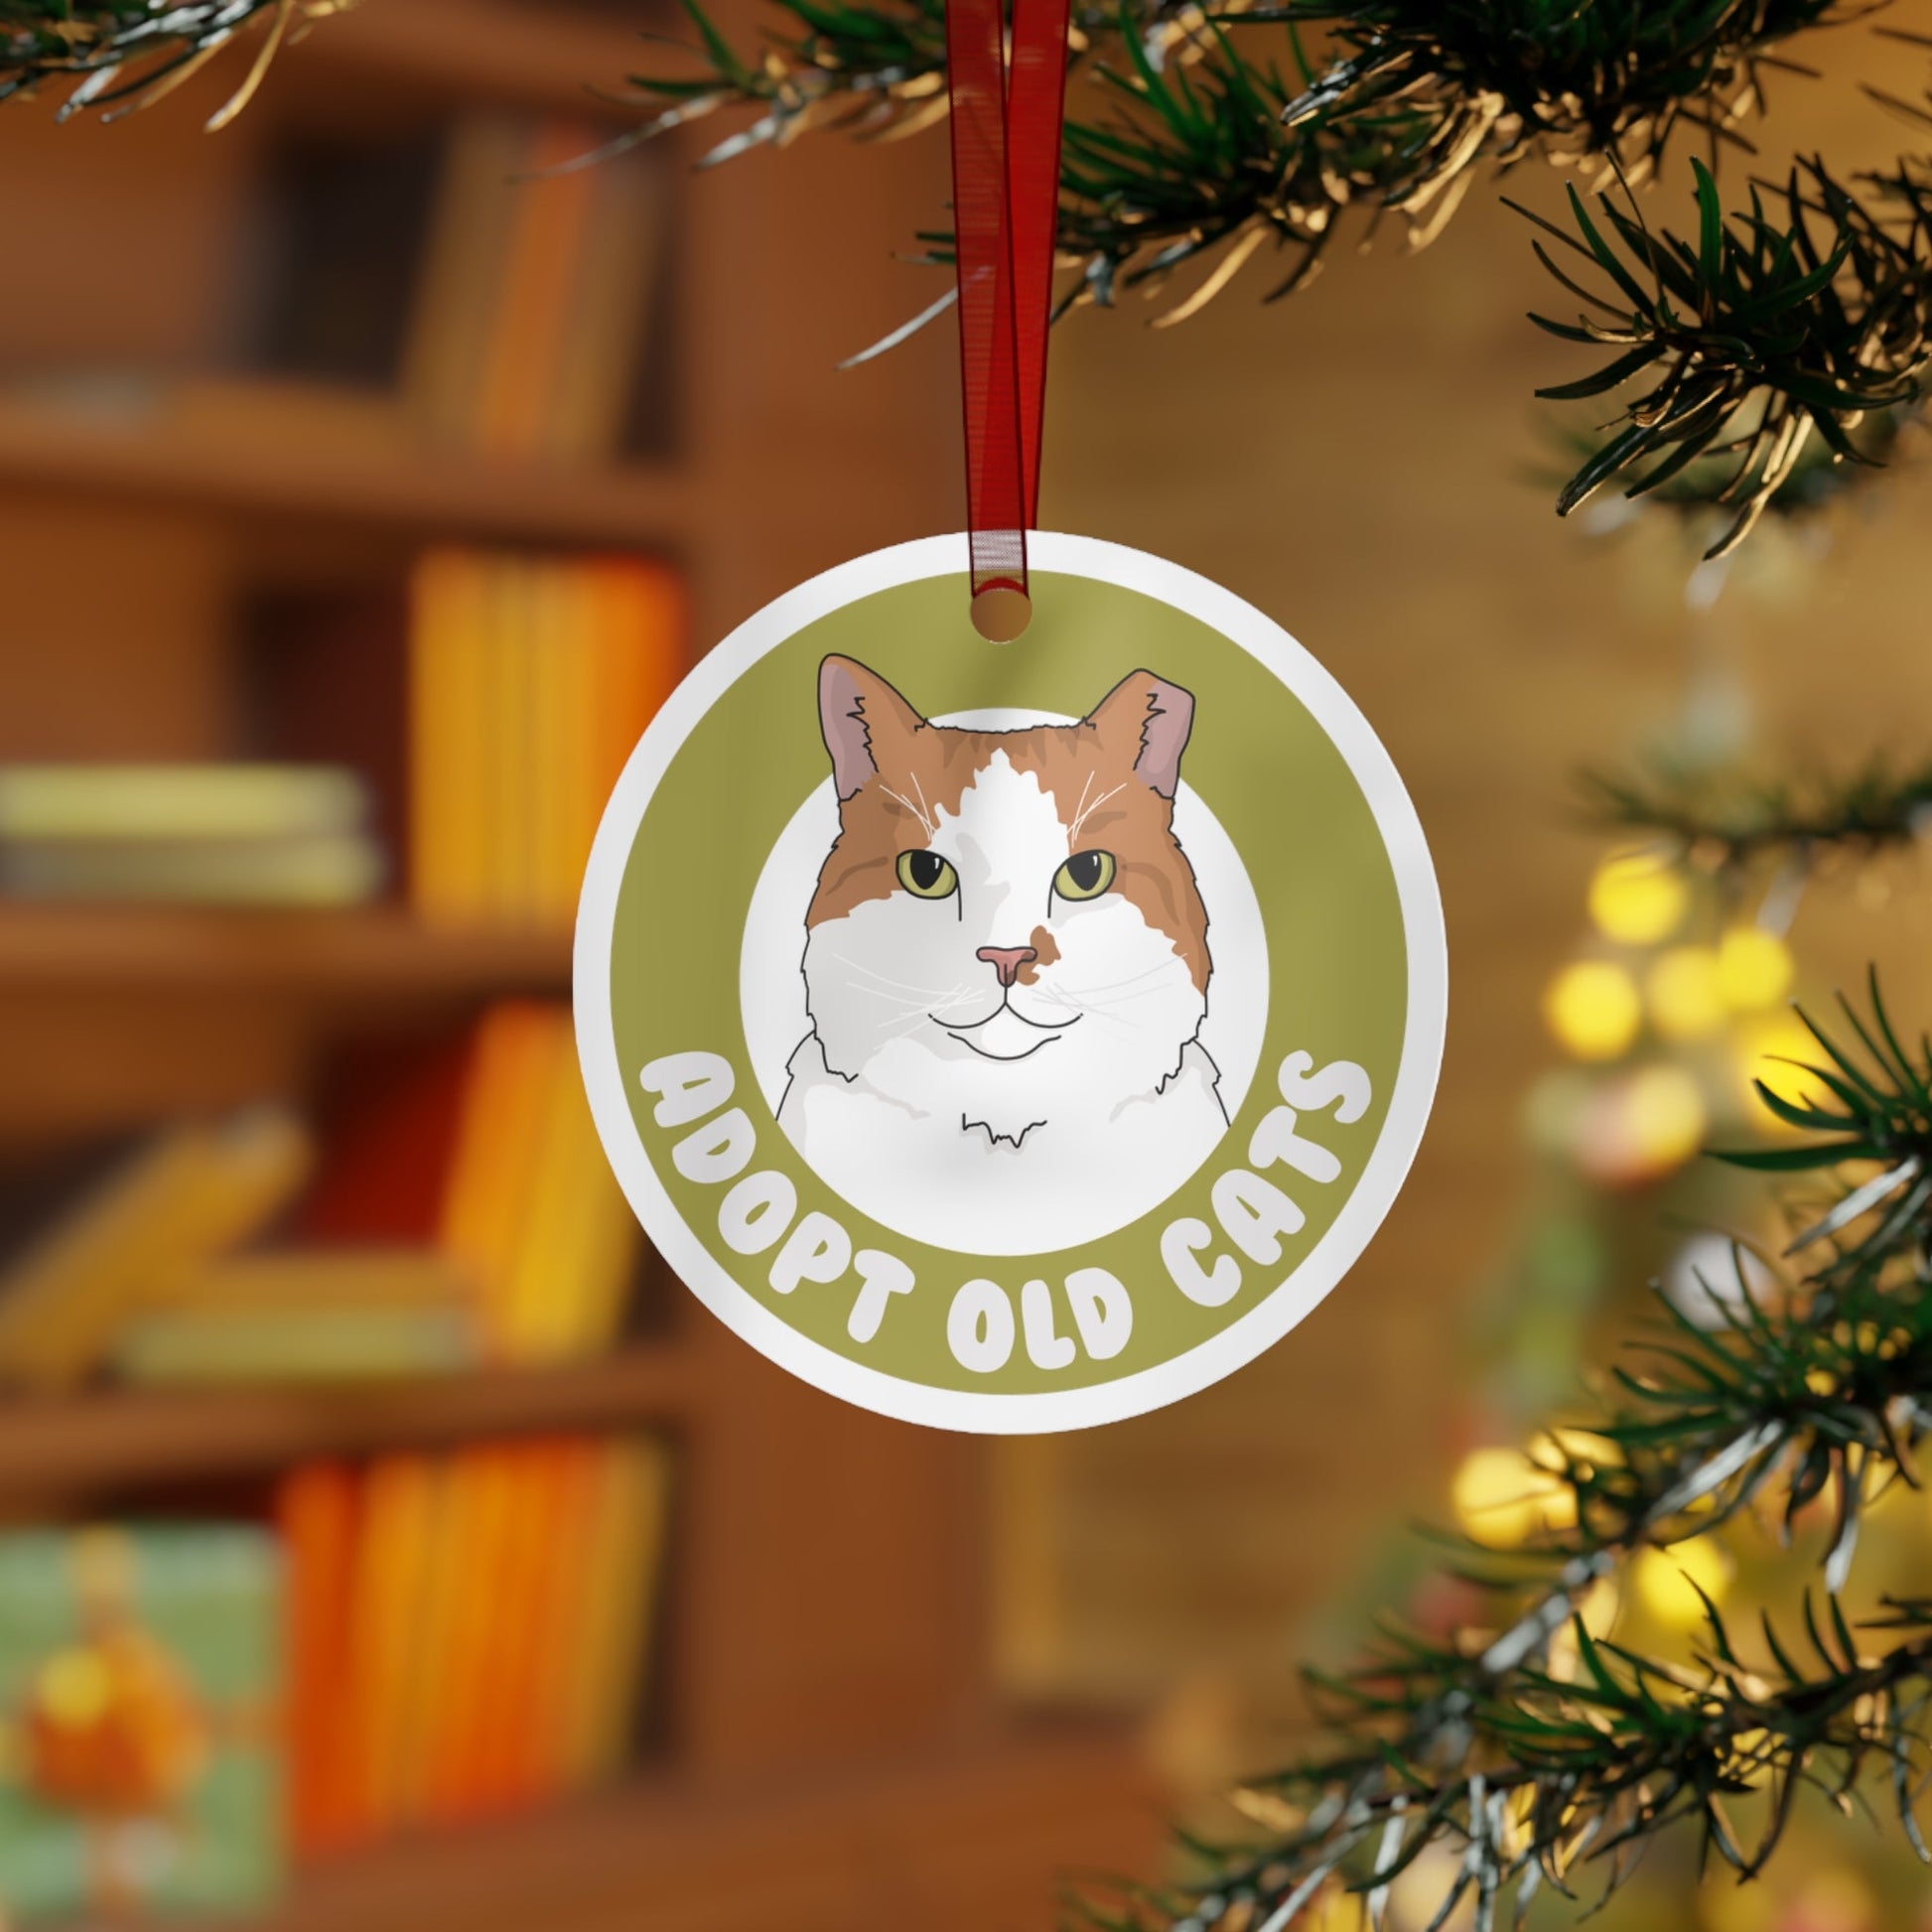 Adopt Old Cats | 2023 Holiday Ornament - Detezi Designs-68781975444016995488